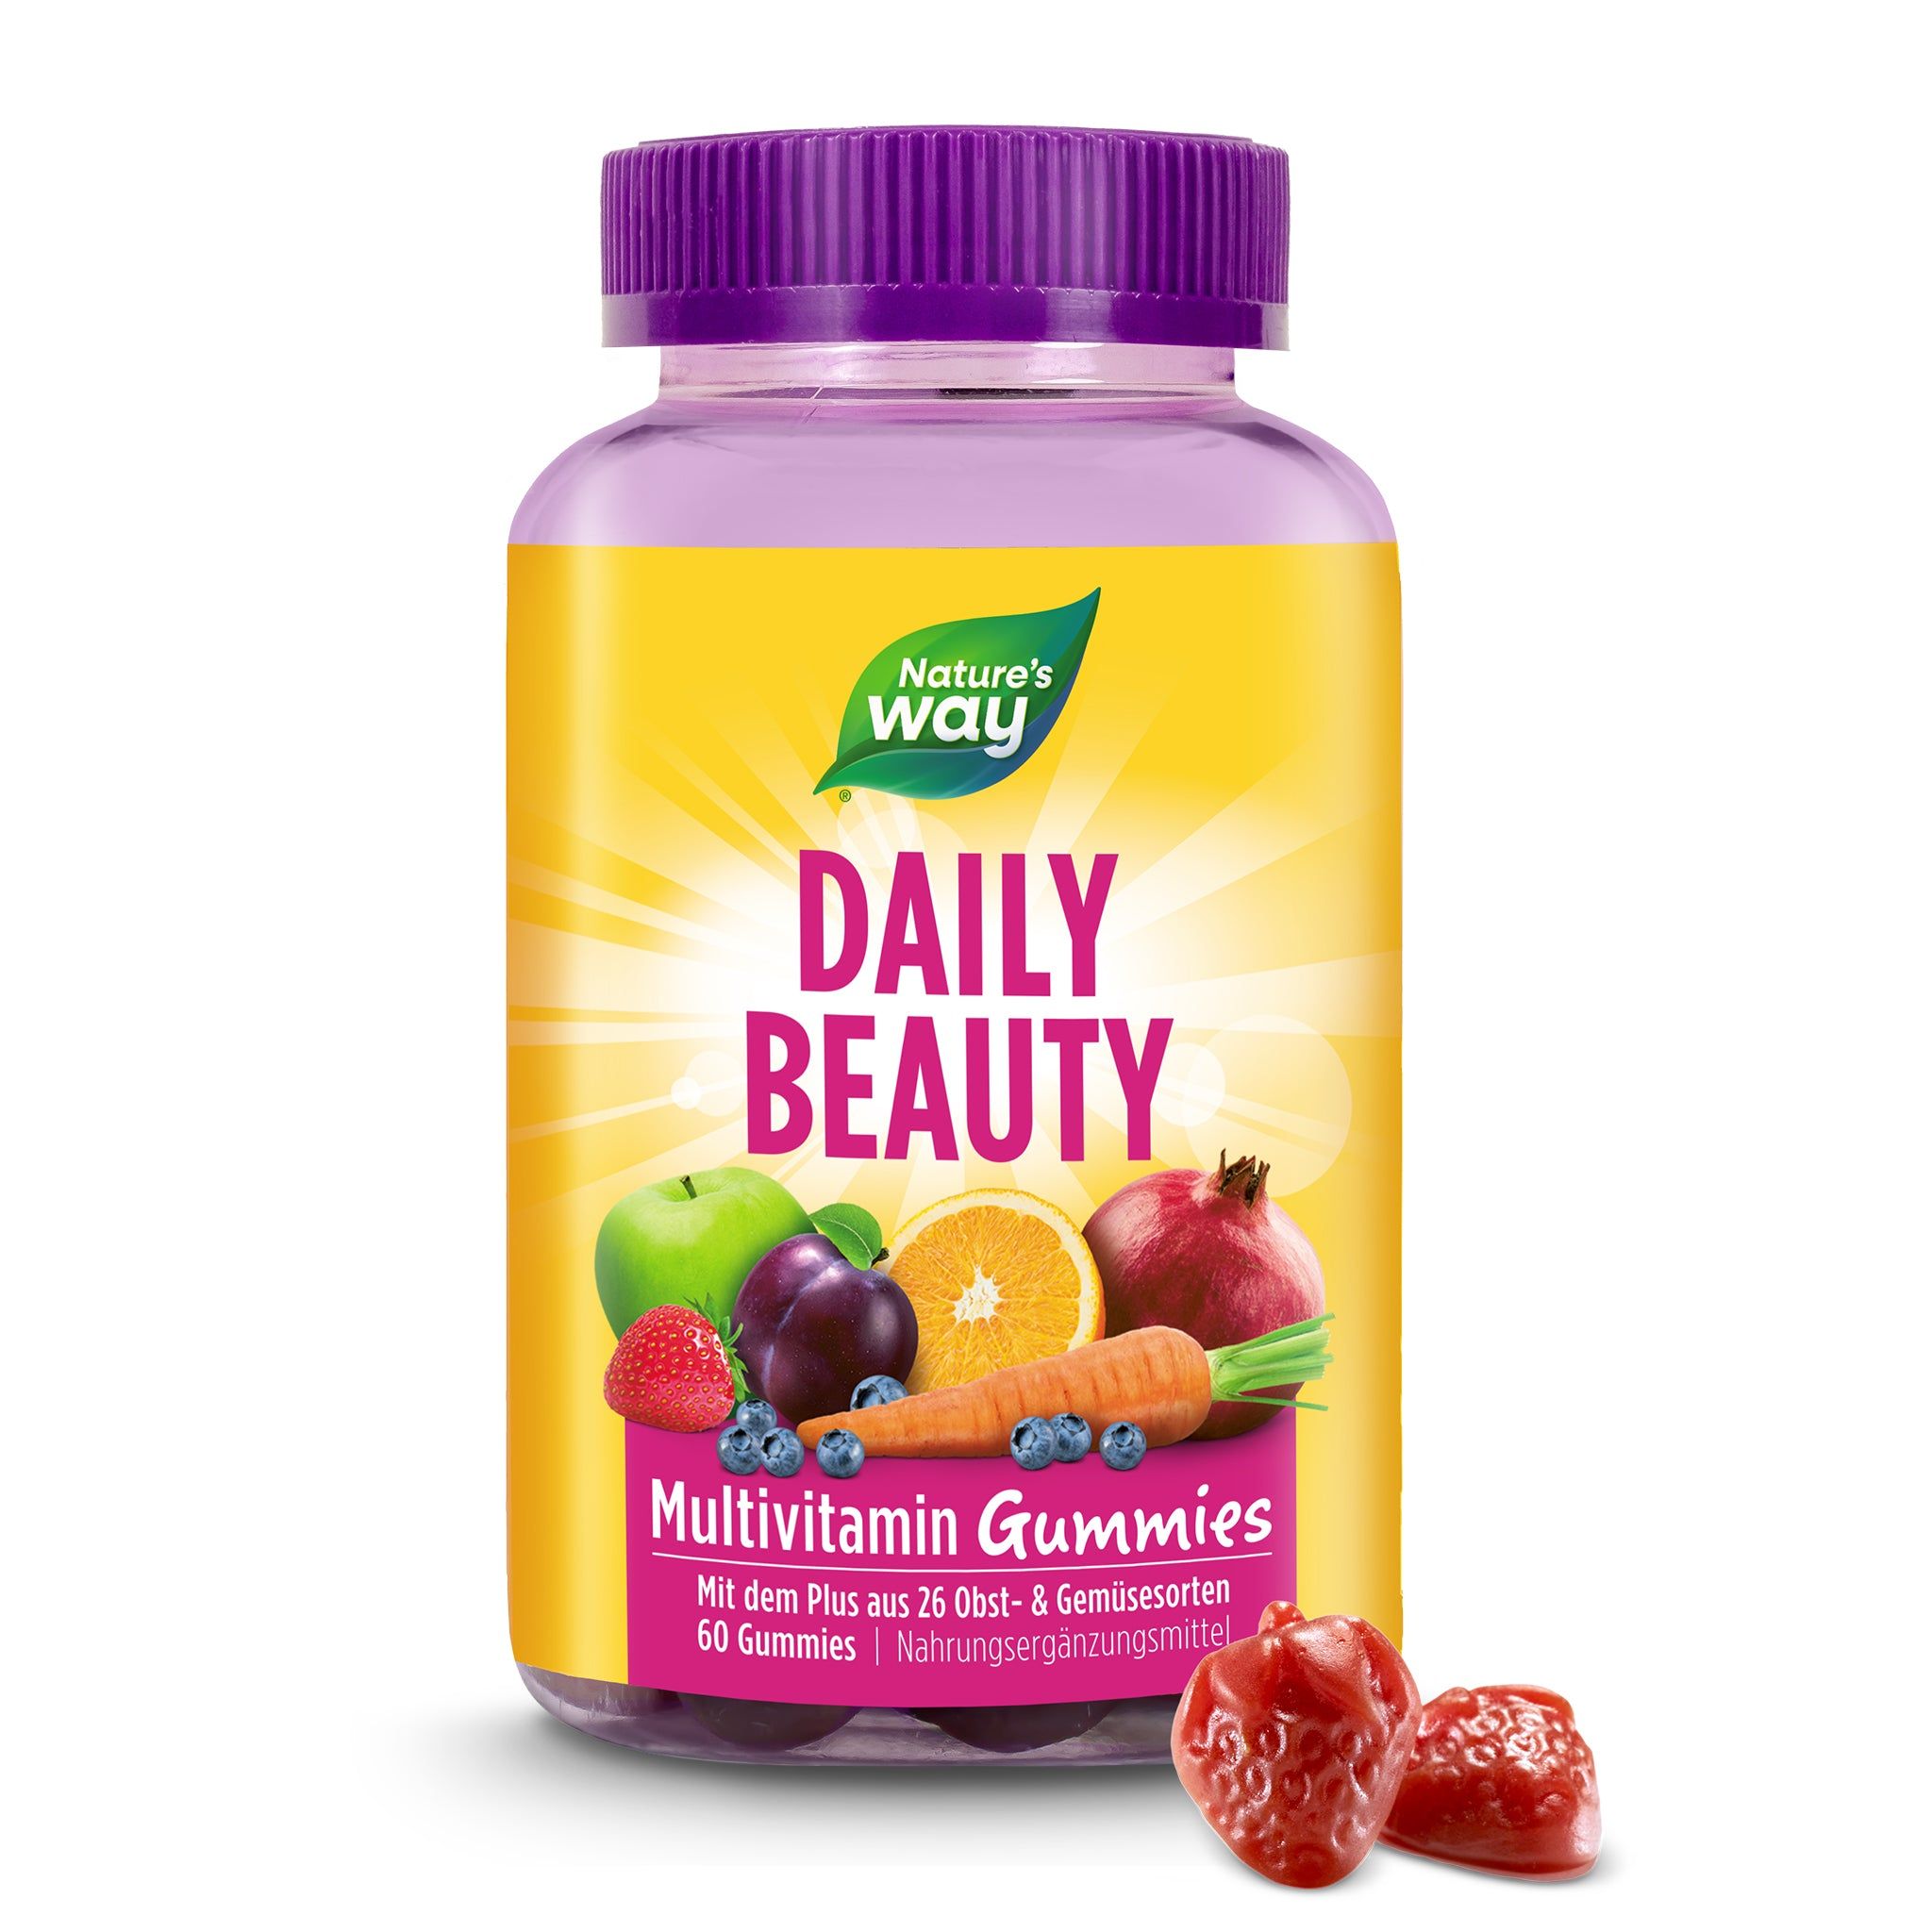 Nature's Way Daily Beauty Gummies